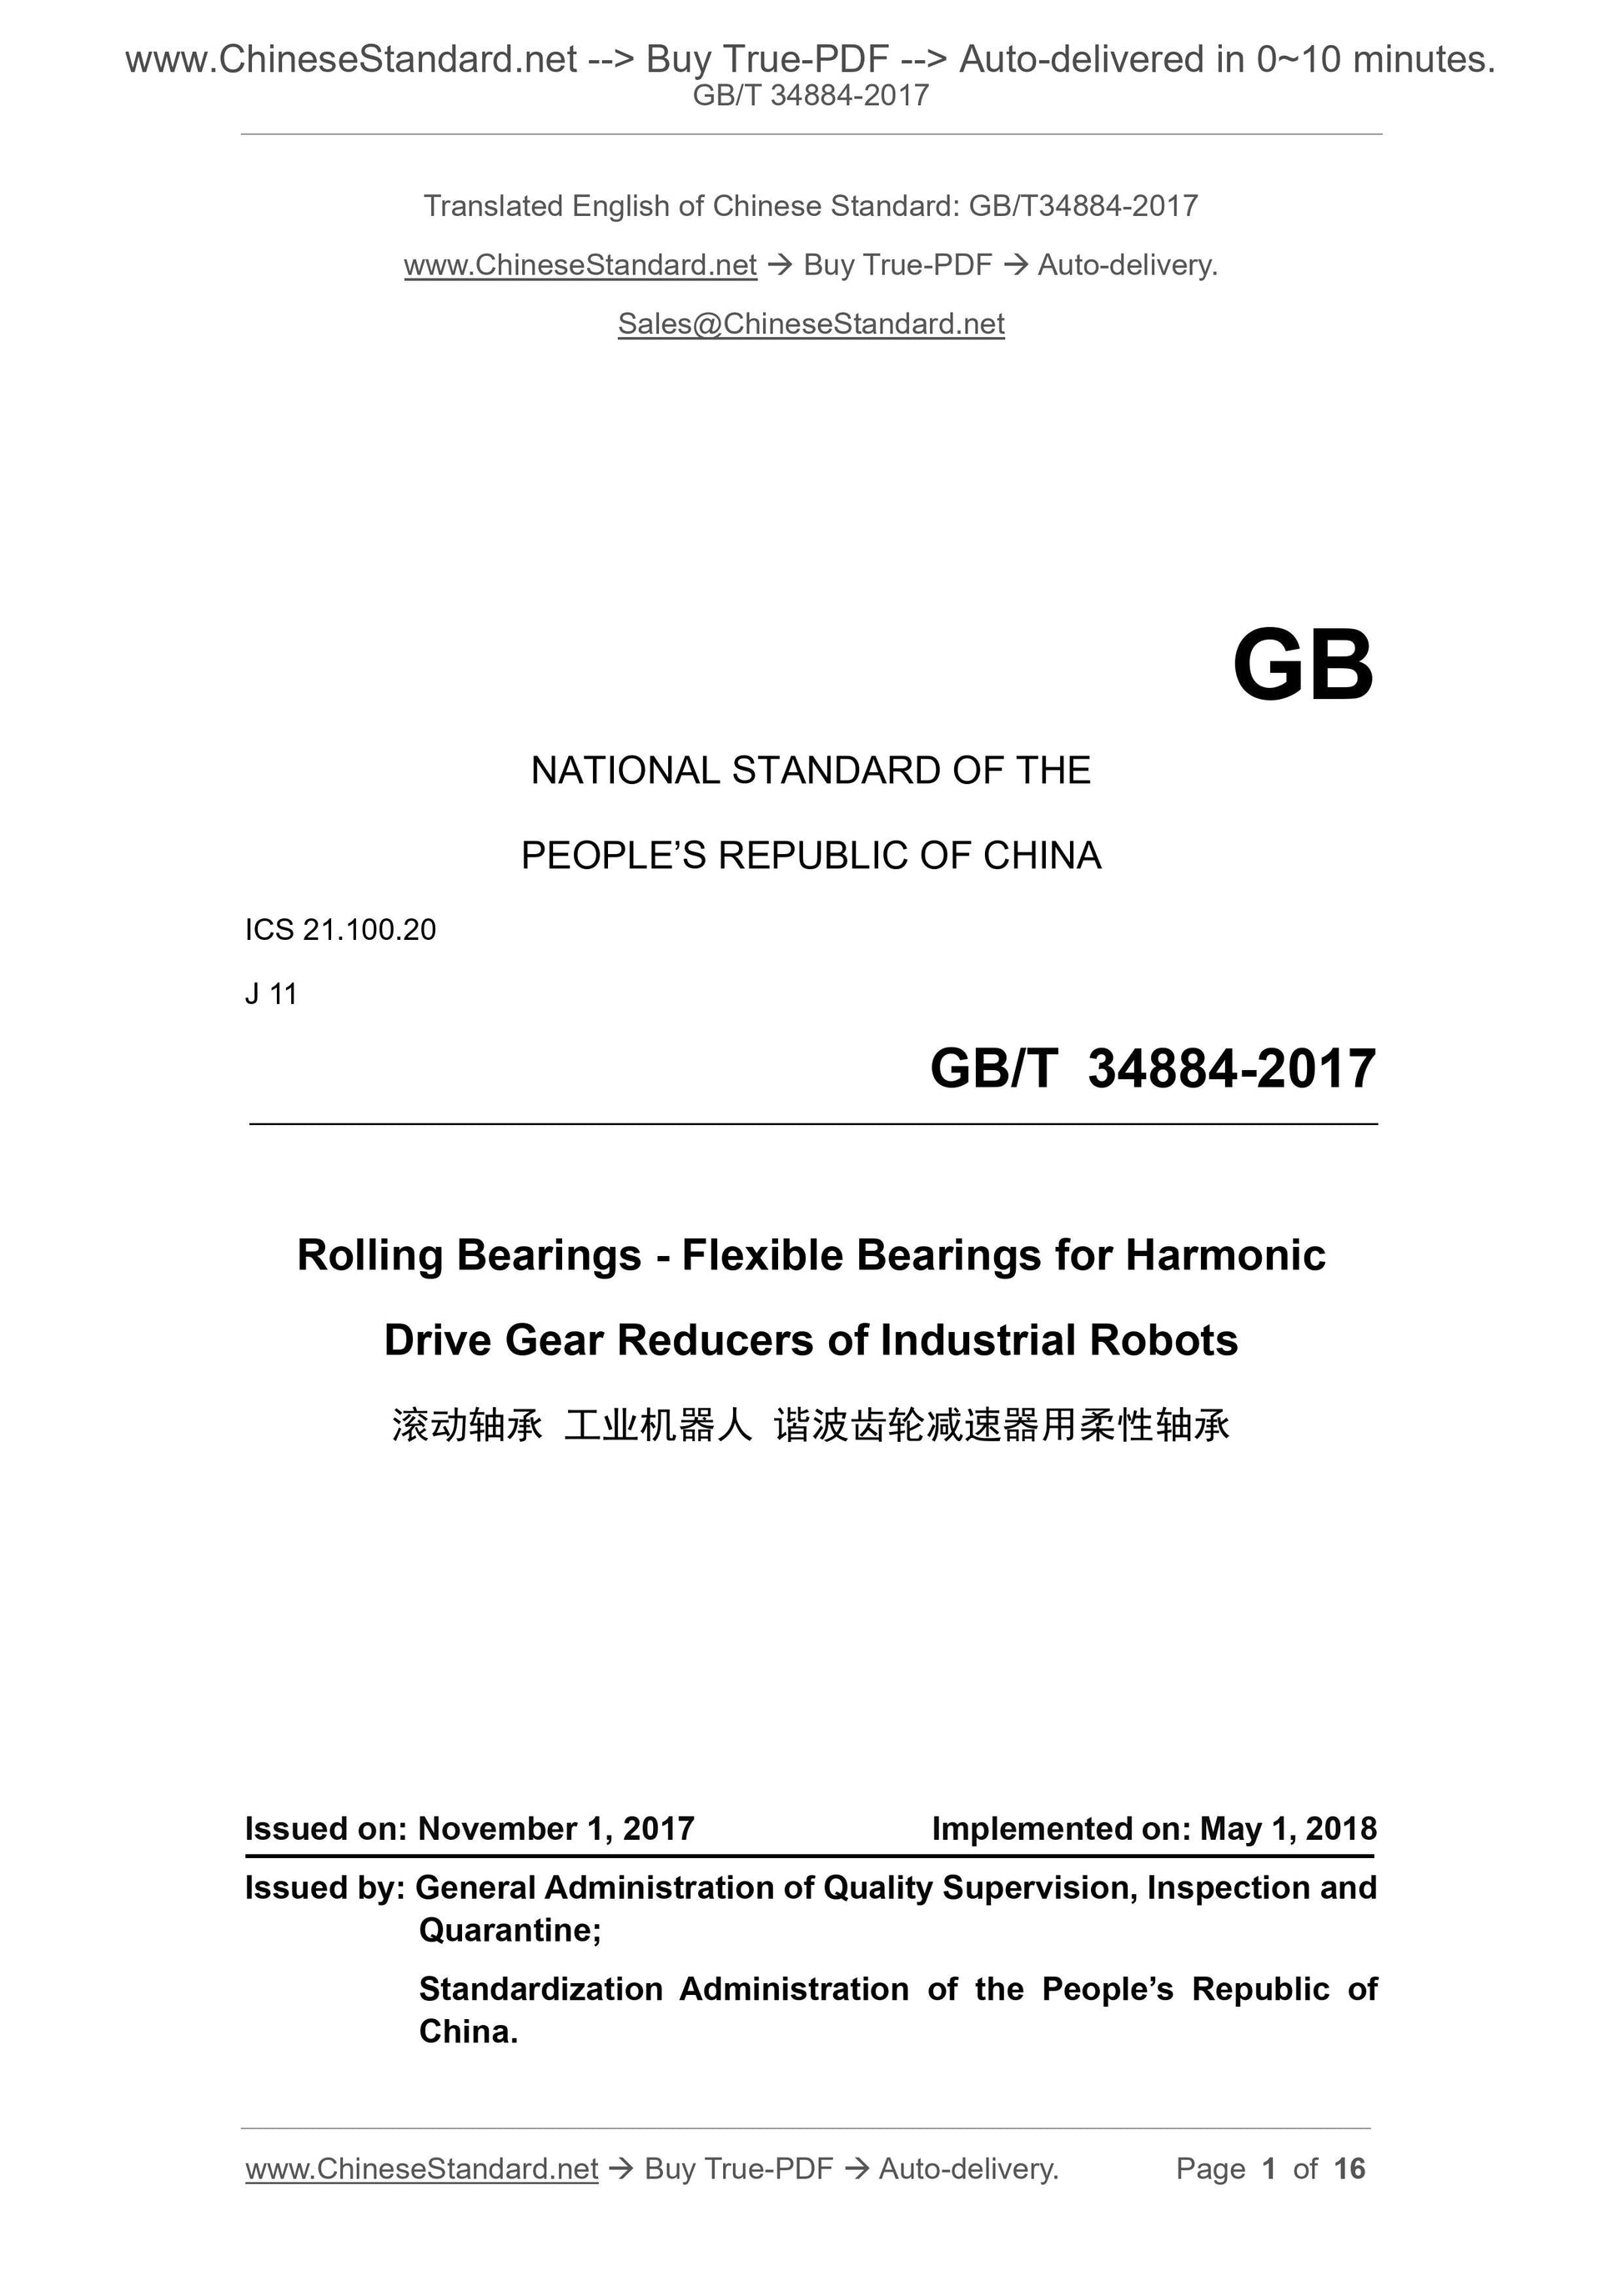 GB/T 34884-2017 Page 1